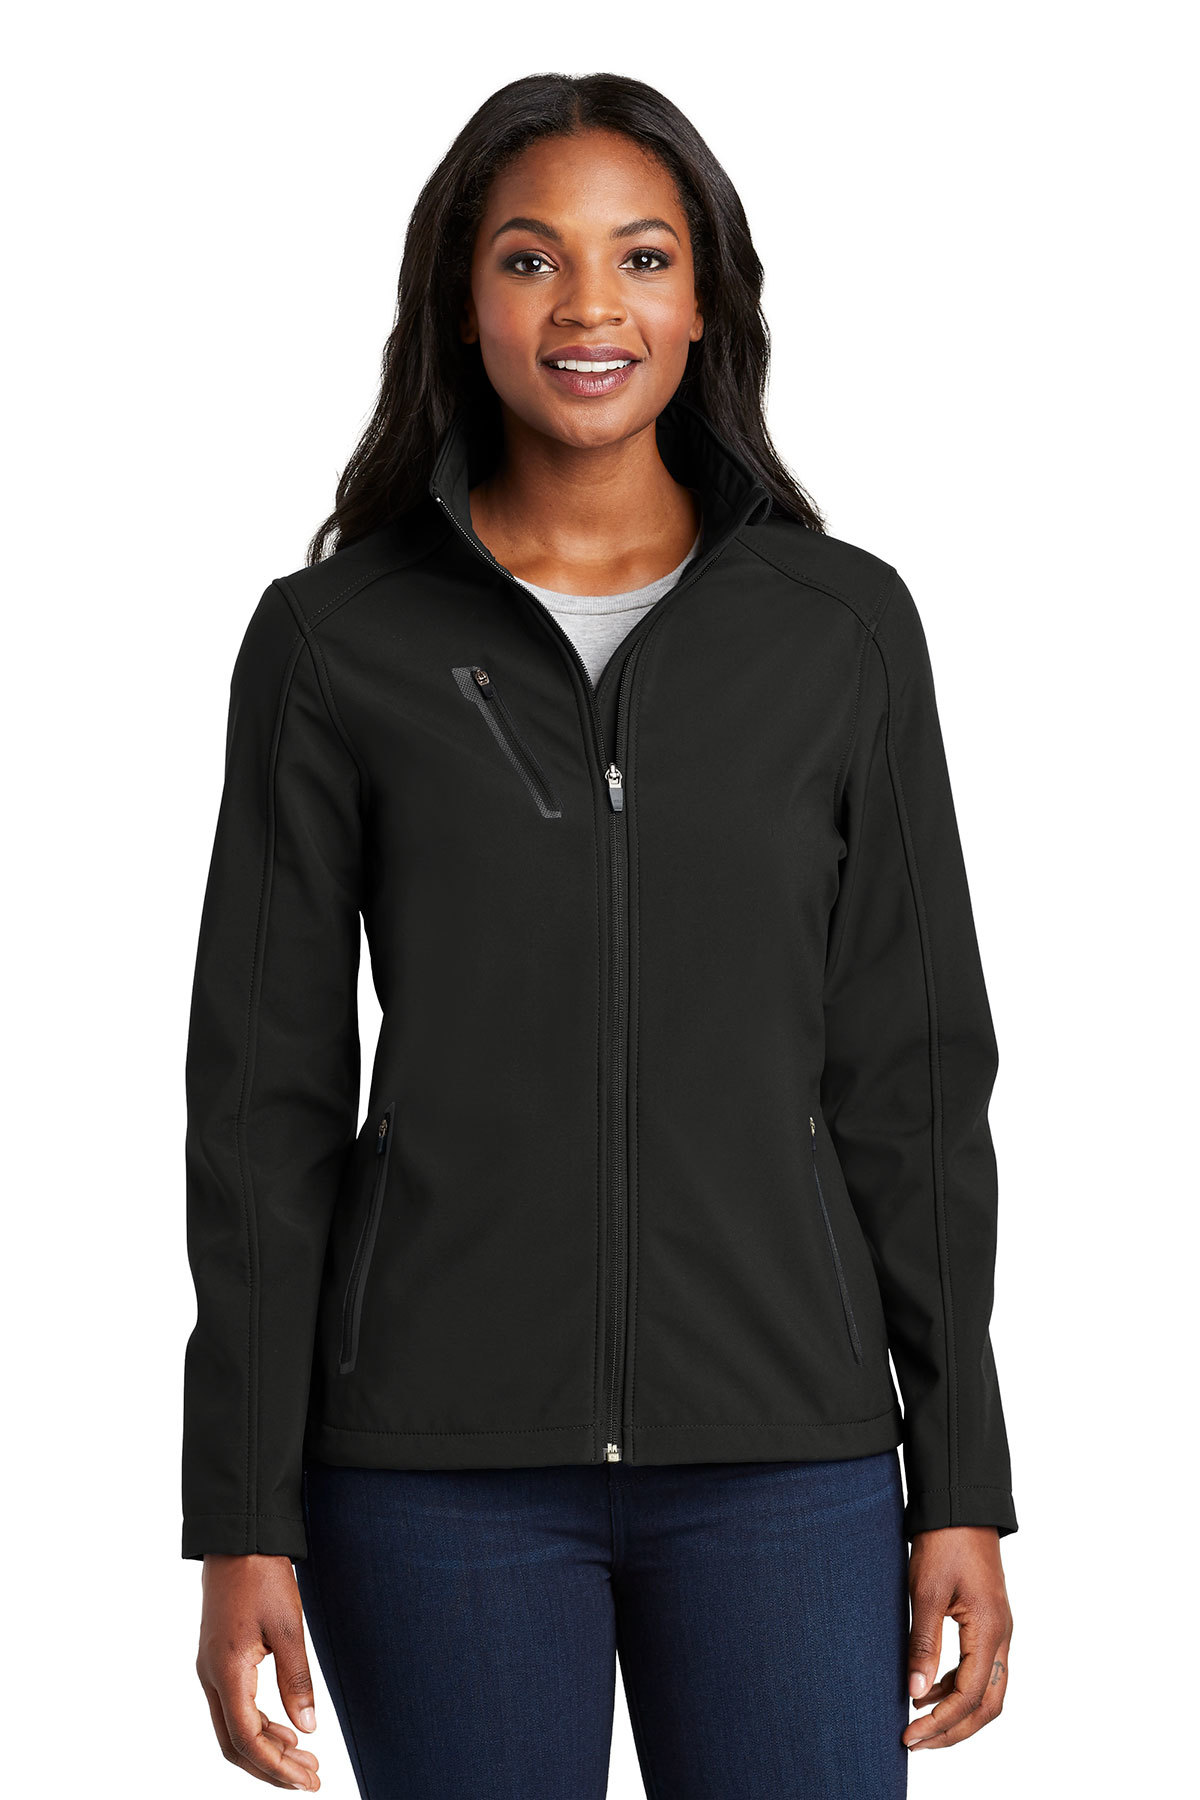 Port Authority Ladies Welded Soft Shell Jacket, Product